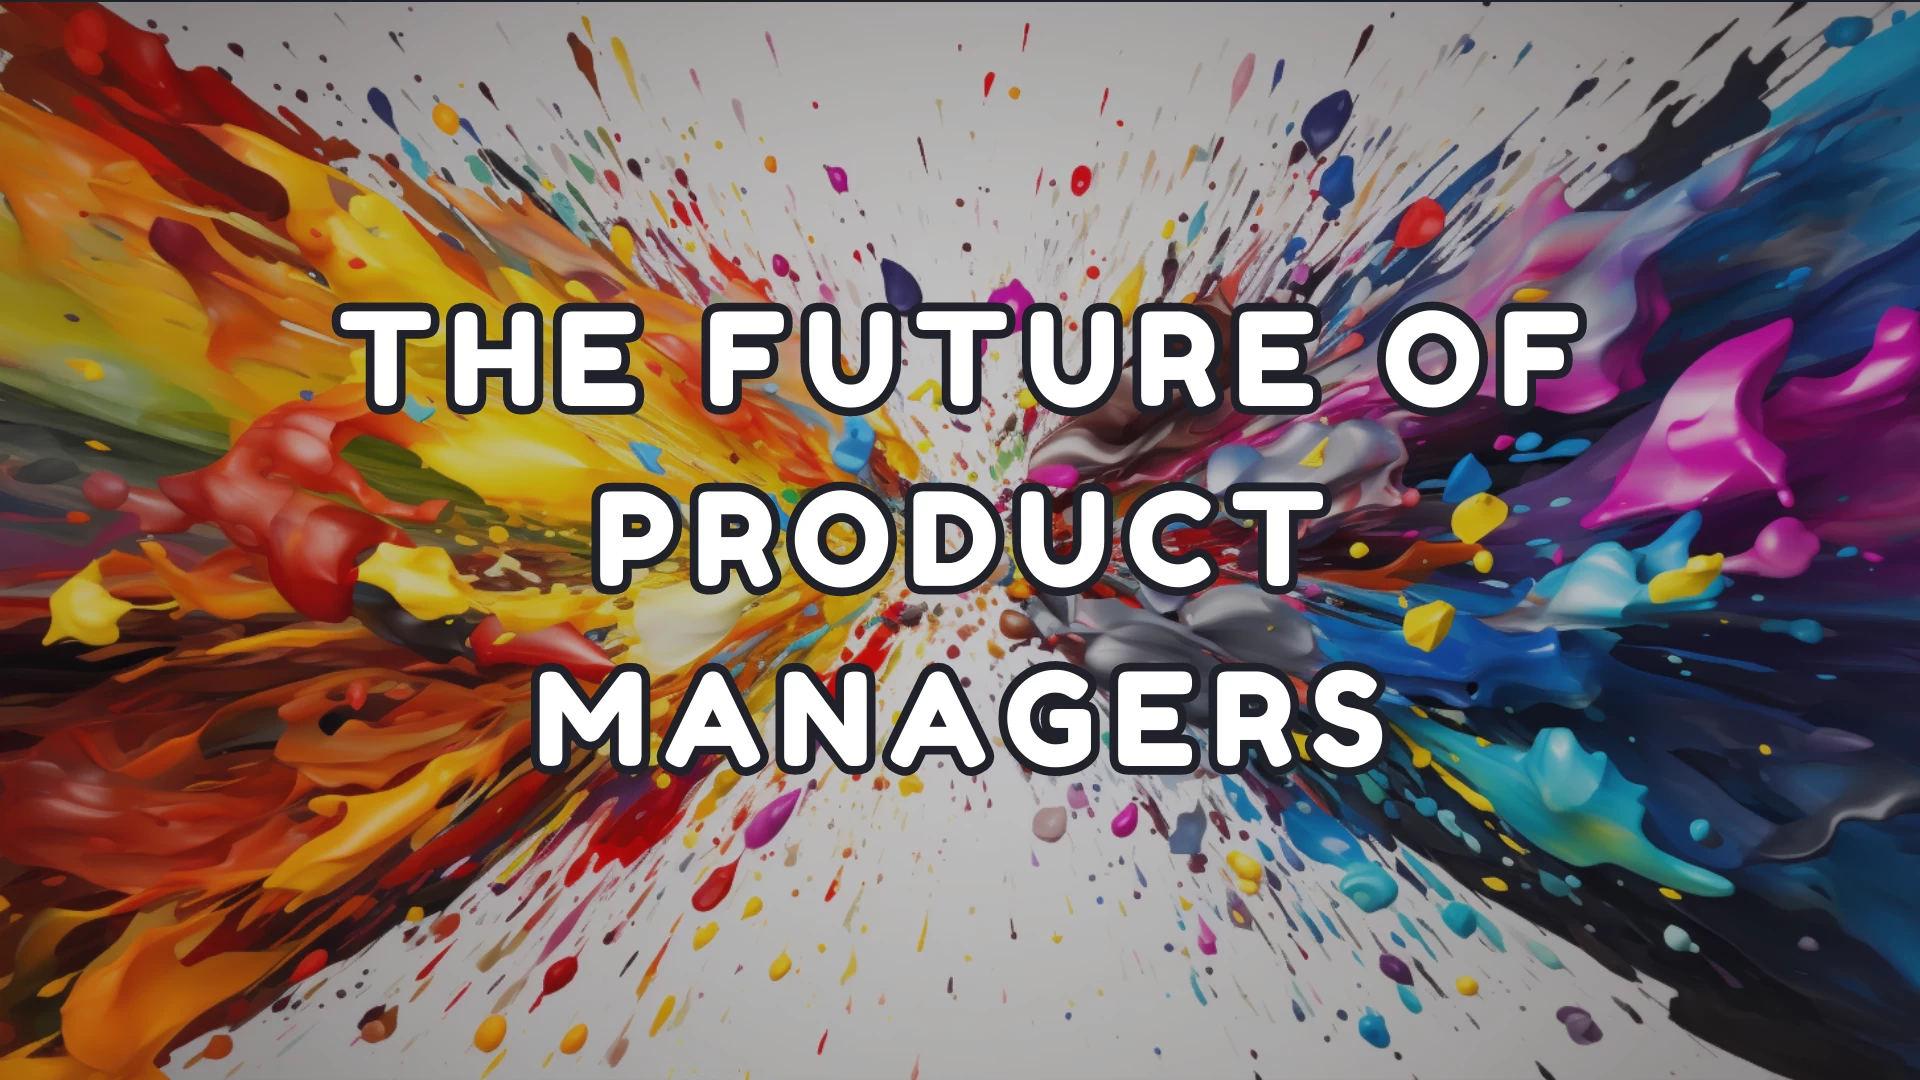 The Future of Product Managers